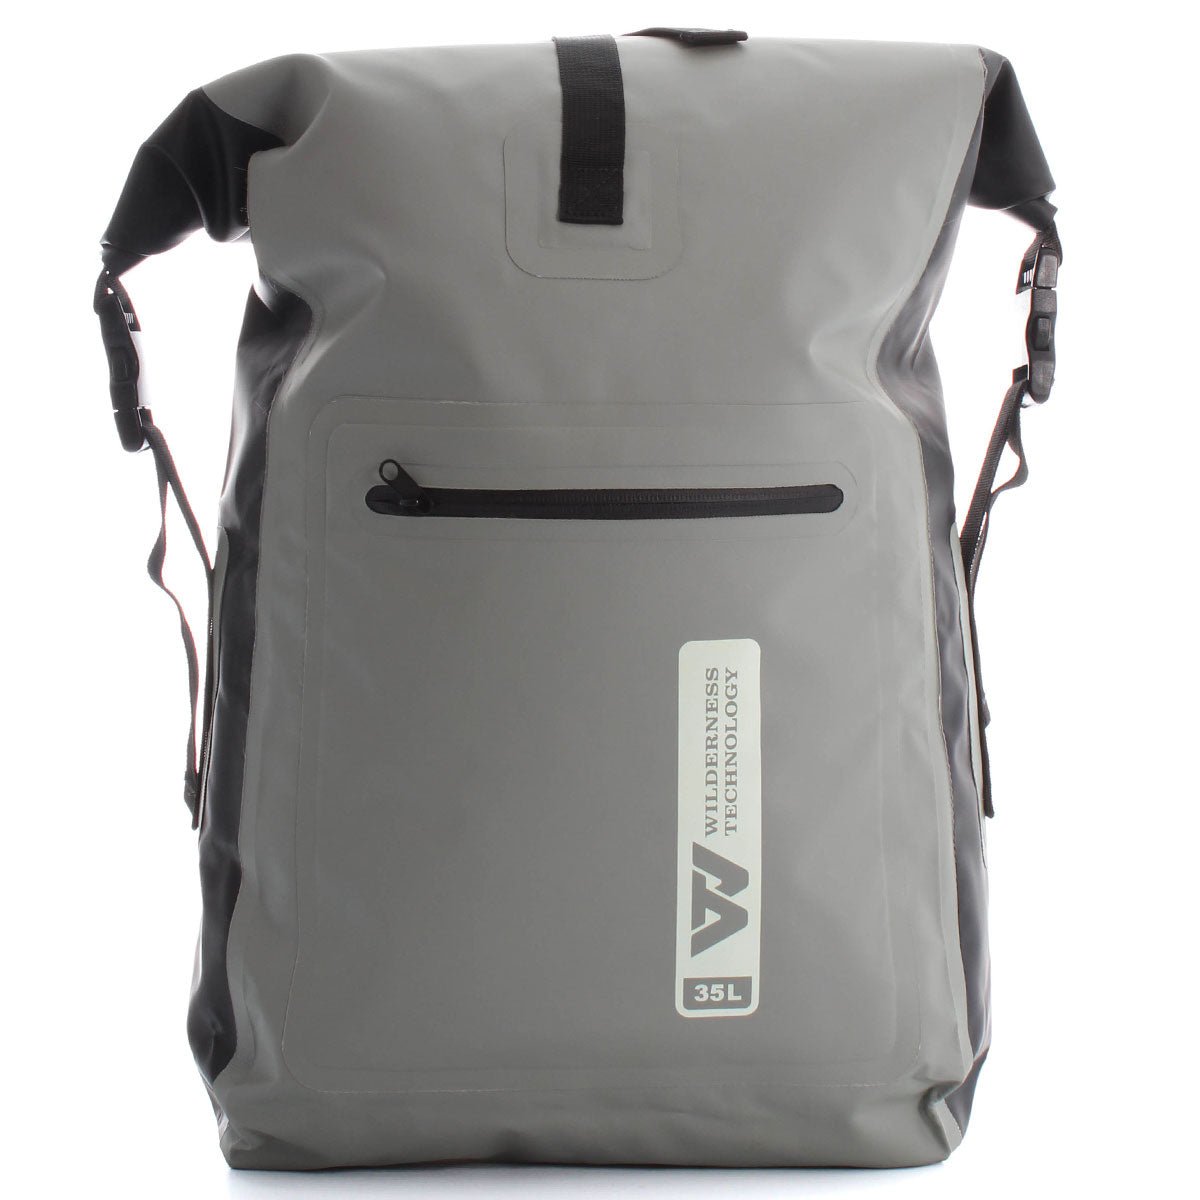 DELUXE DRY BACKPACK PVC - Next Adventure